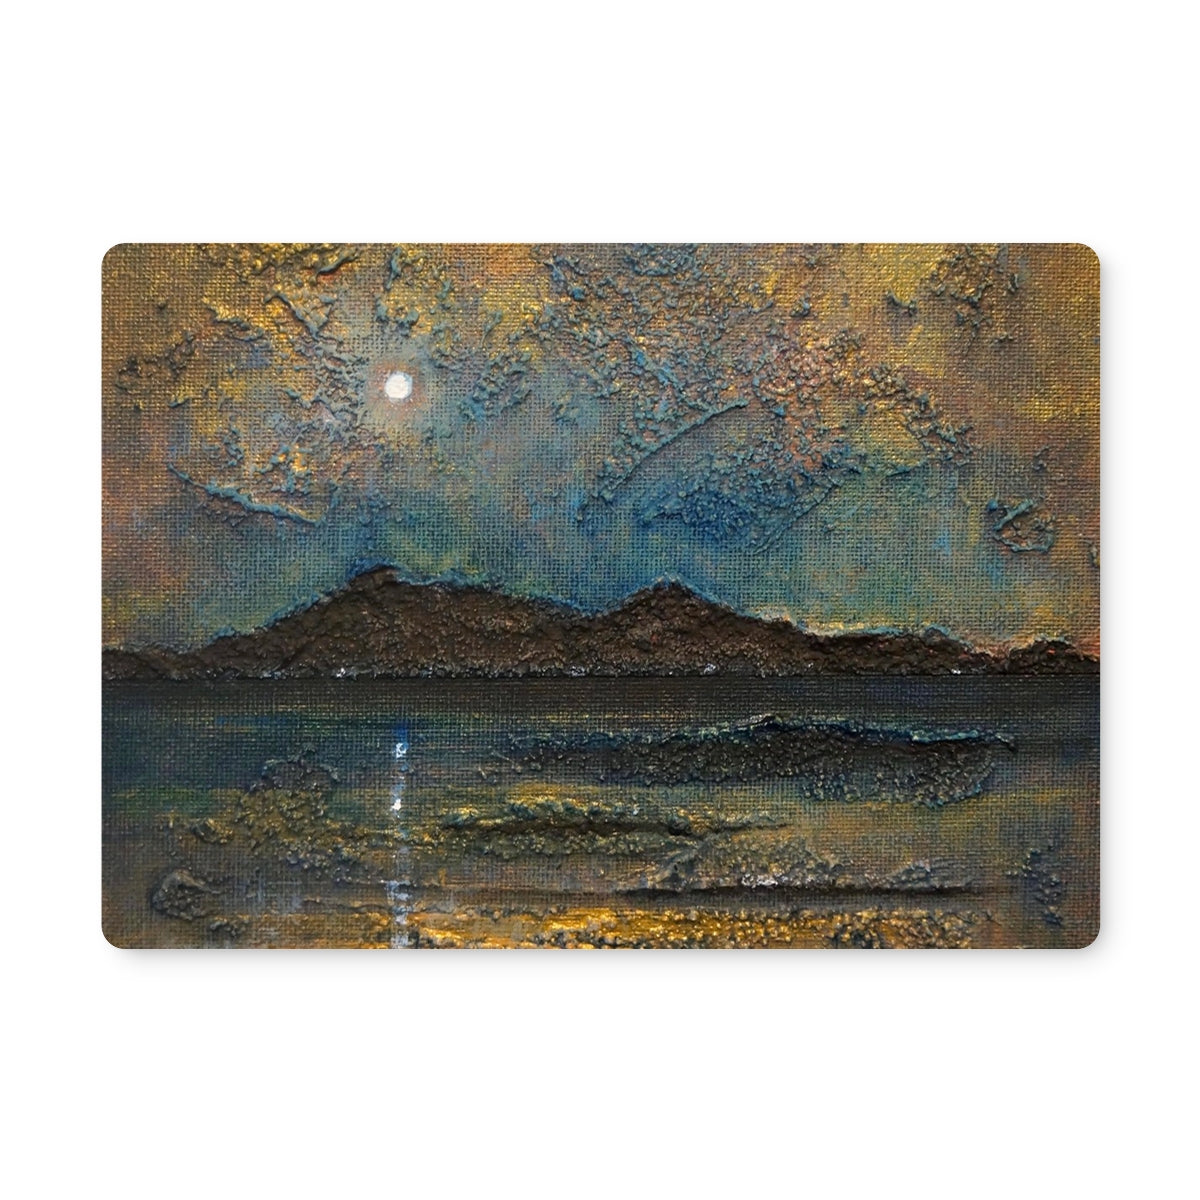 Arran Moonlight Art Gifts Placemat-Placemats-Arran Art Gallery-6 Placemats-Paintings, Prints, Homeware, Art Gifts From Scotland By Scottish Artist Kevin Hunter